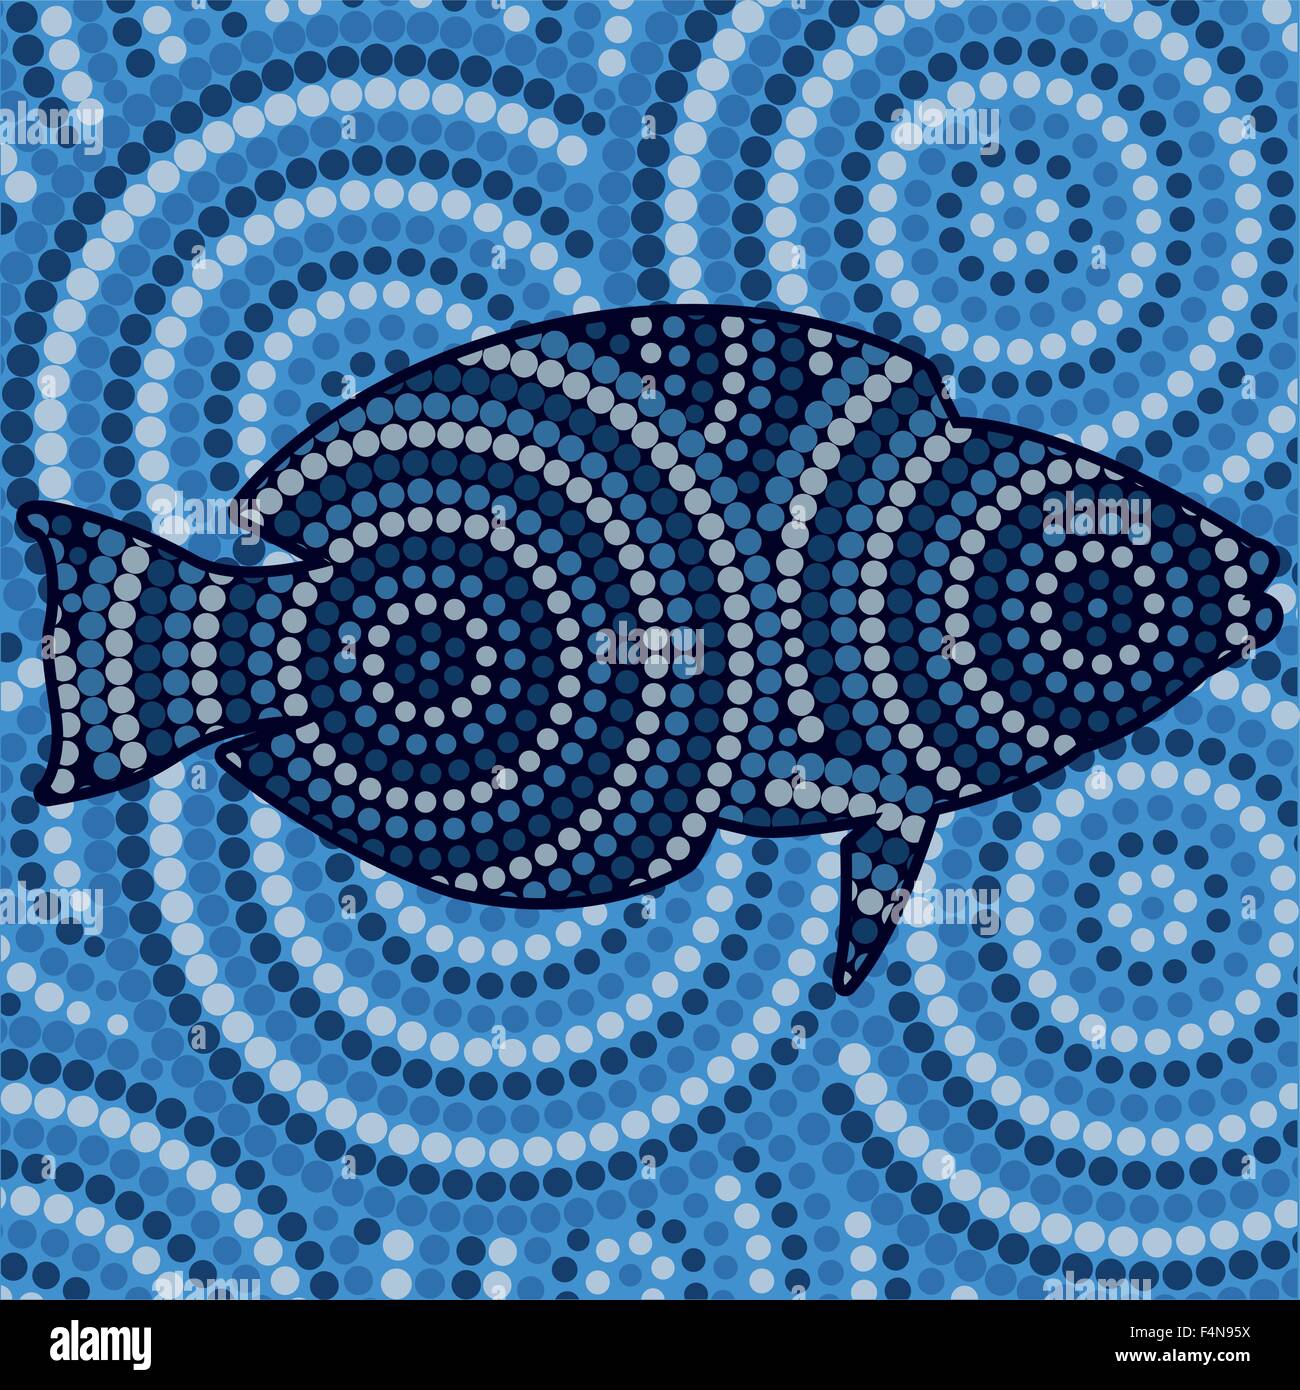 Abstract Aboriginal fish dot painting in vector format. Stock Vector